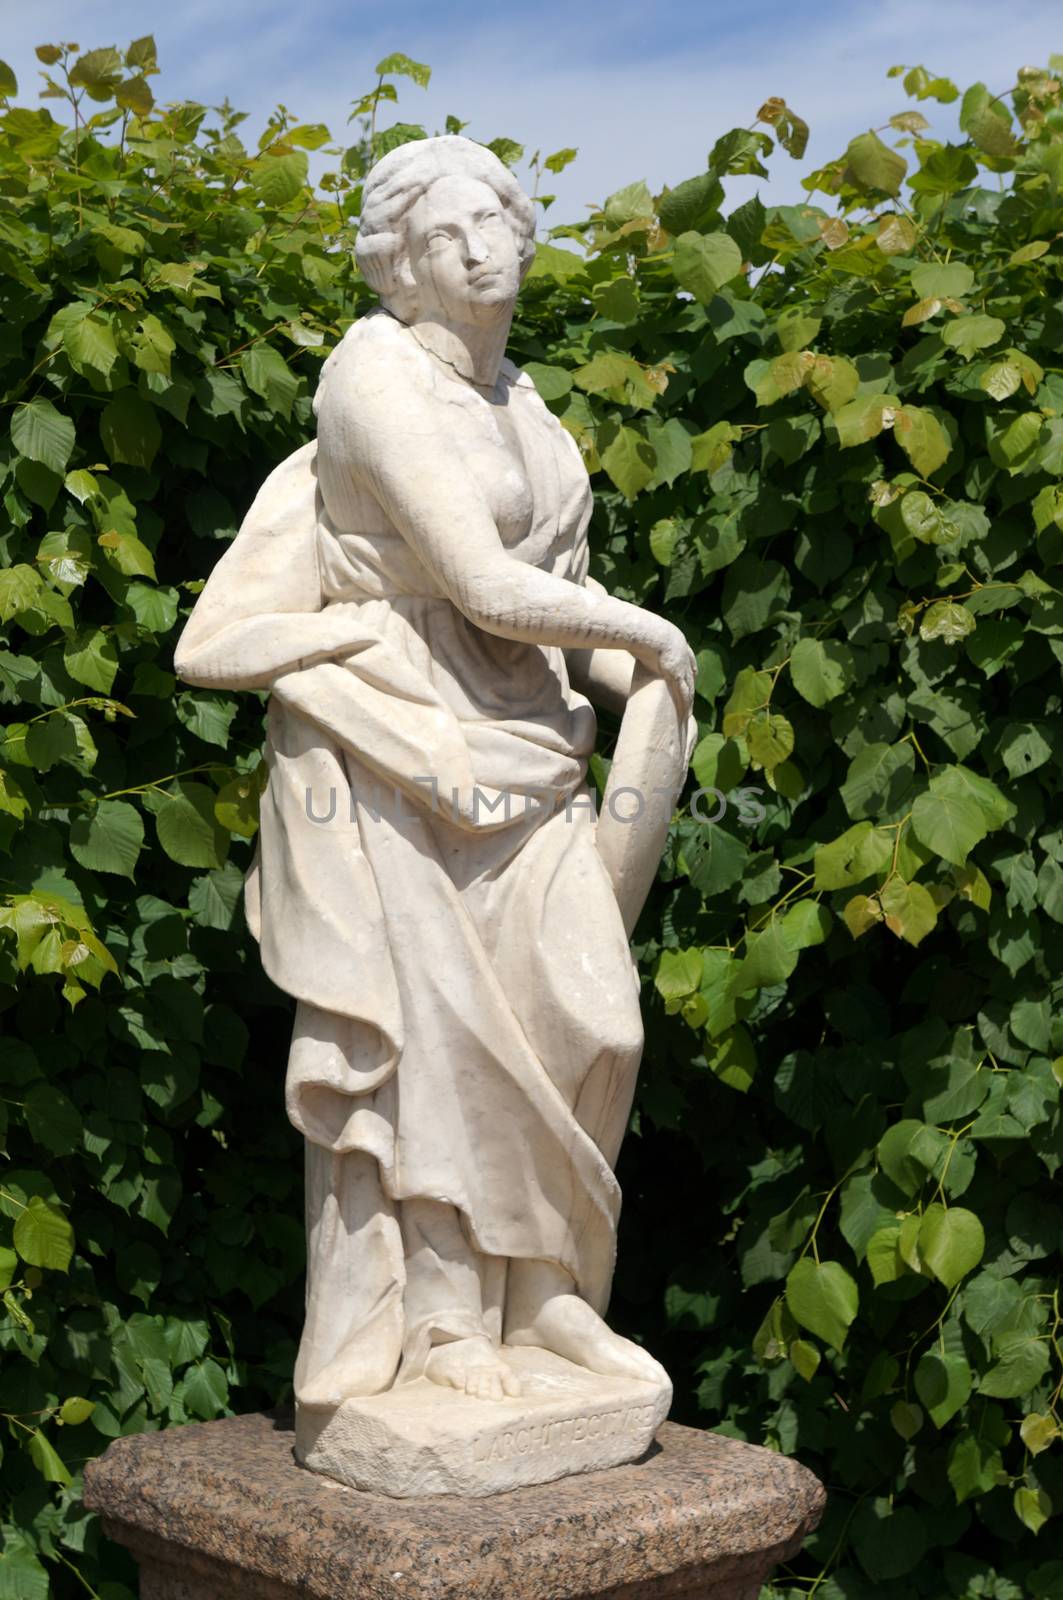  Marble sculpture in the park                              